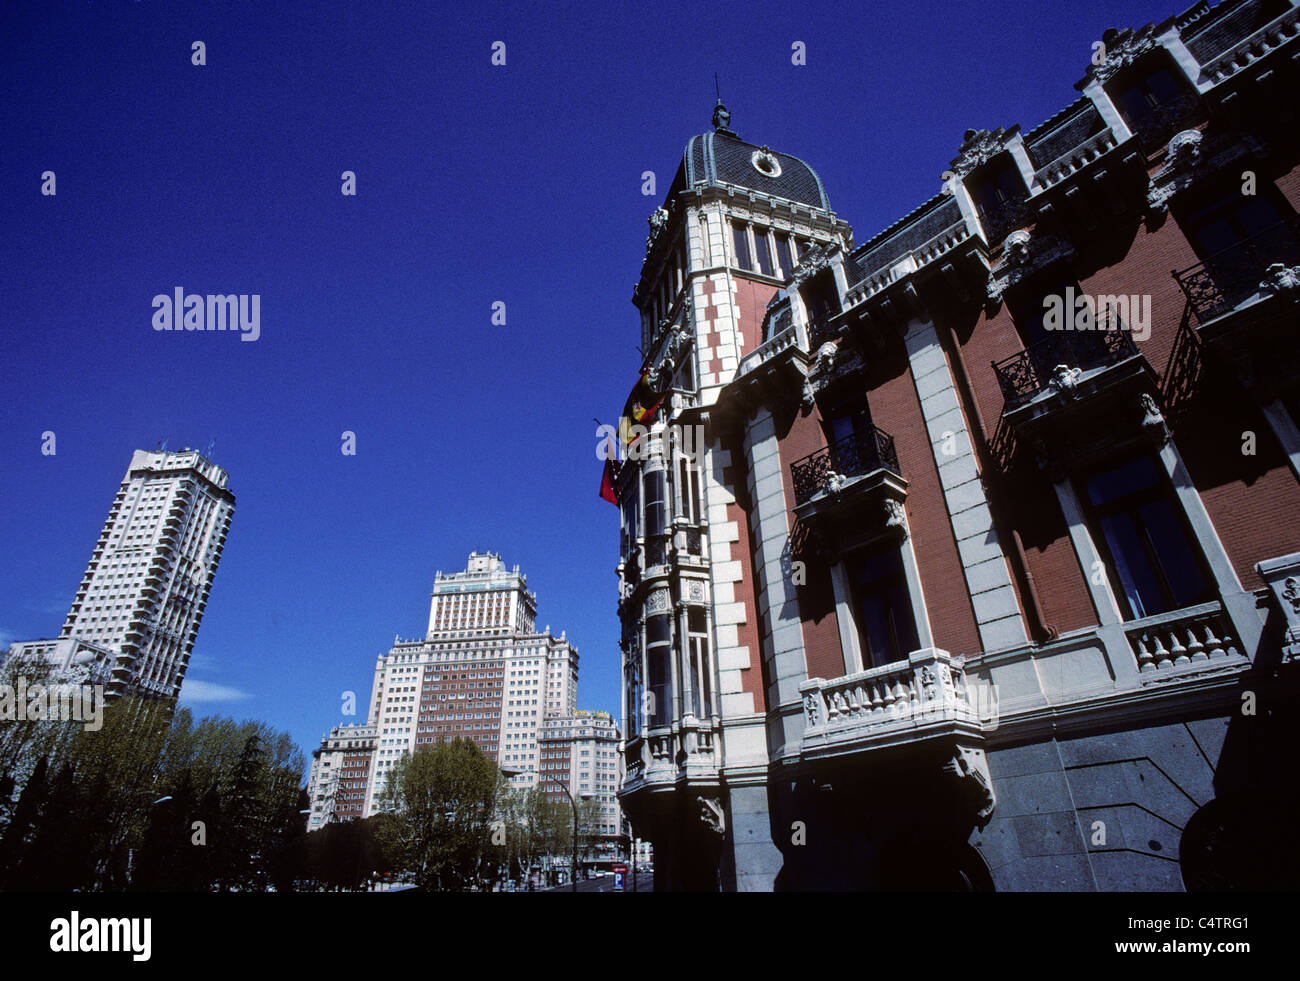 Madrid. Plazza Espania in central Madrid showing typical architecture. Stock Photo